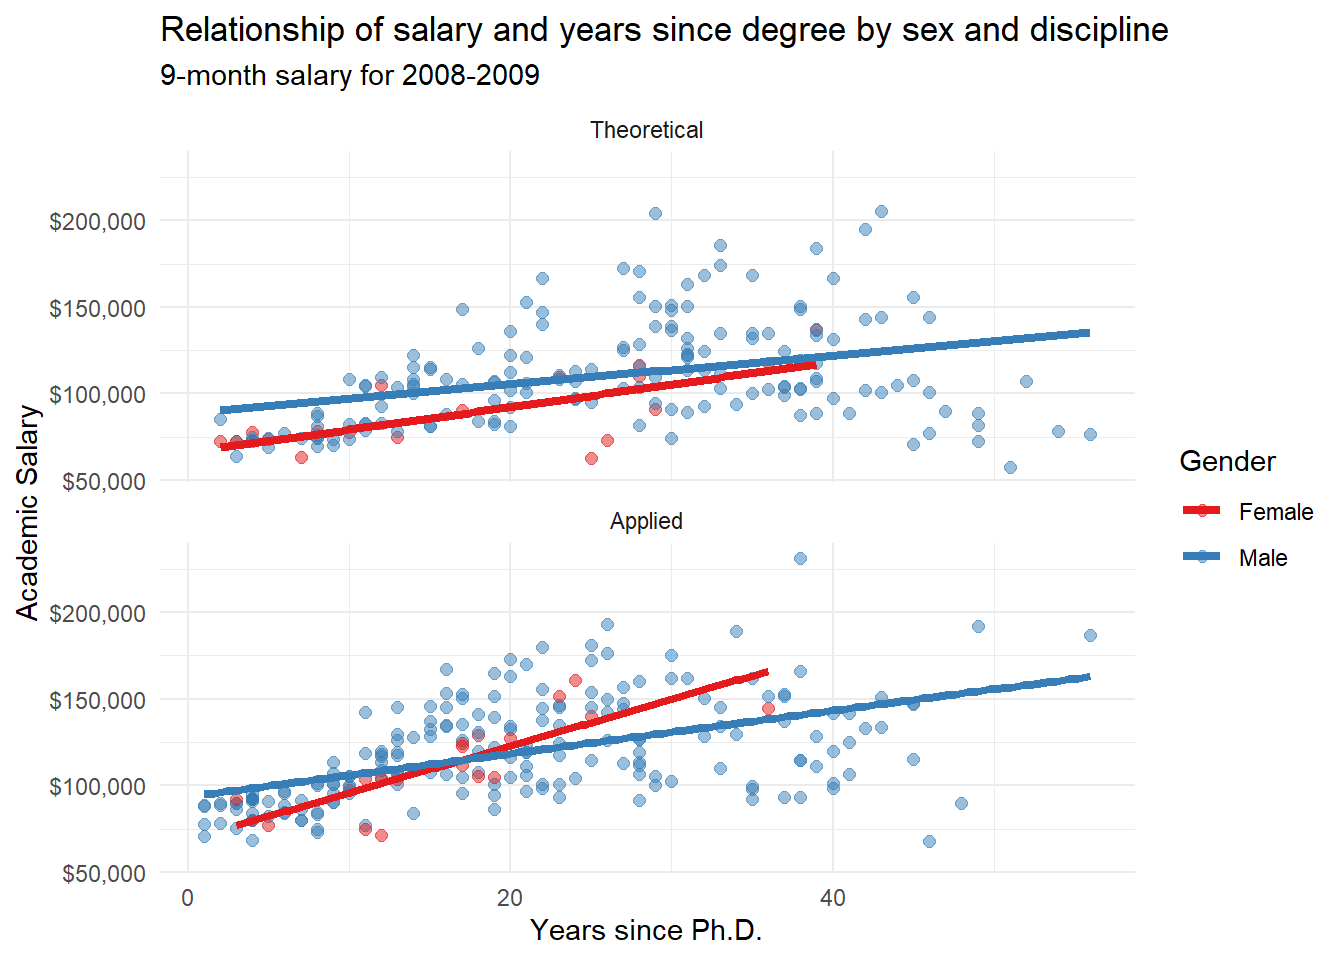 Salary by experience, rank, and sex (better labeled)